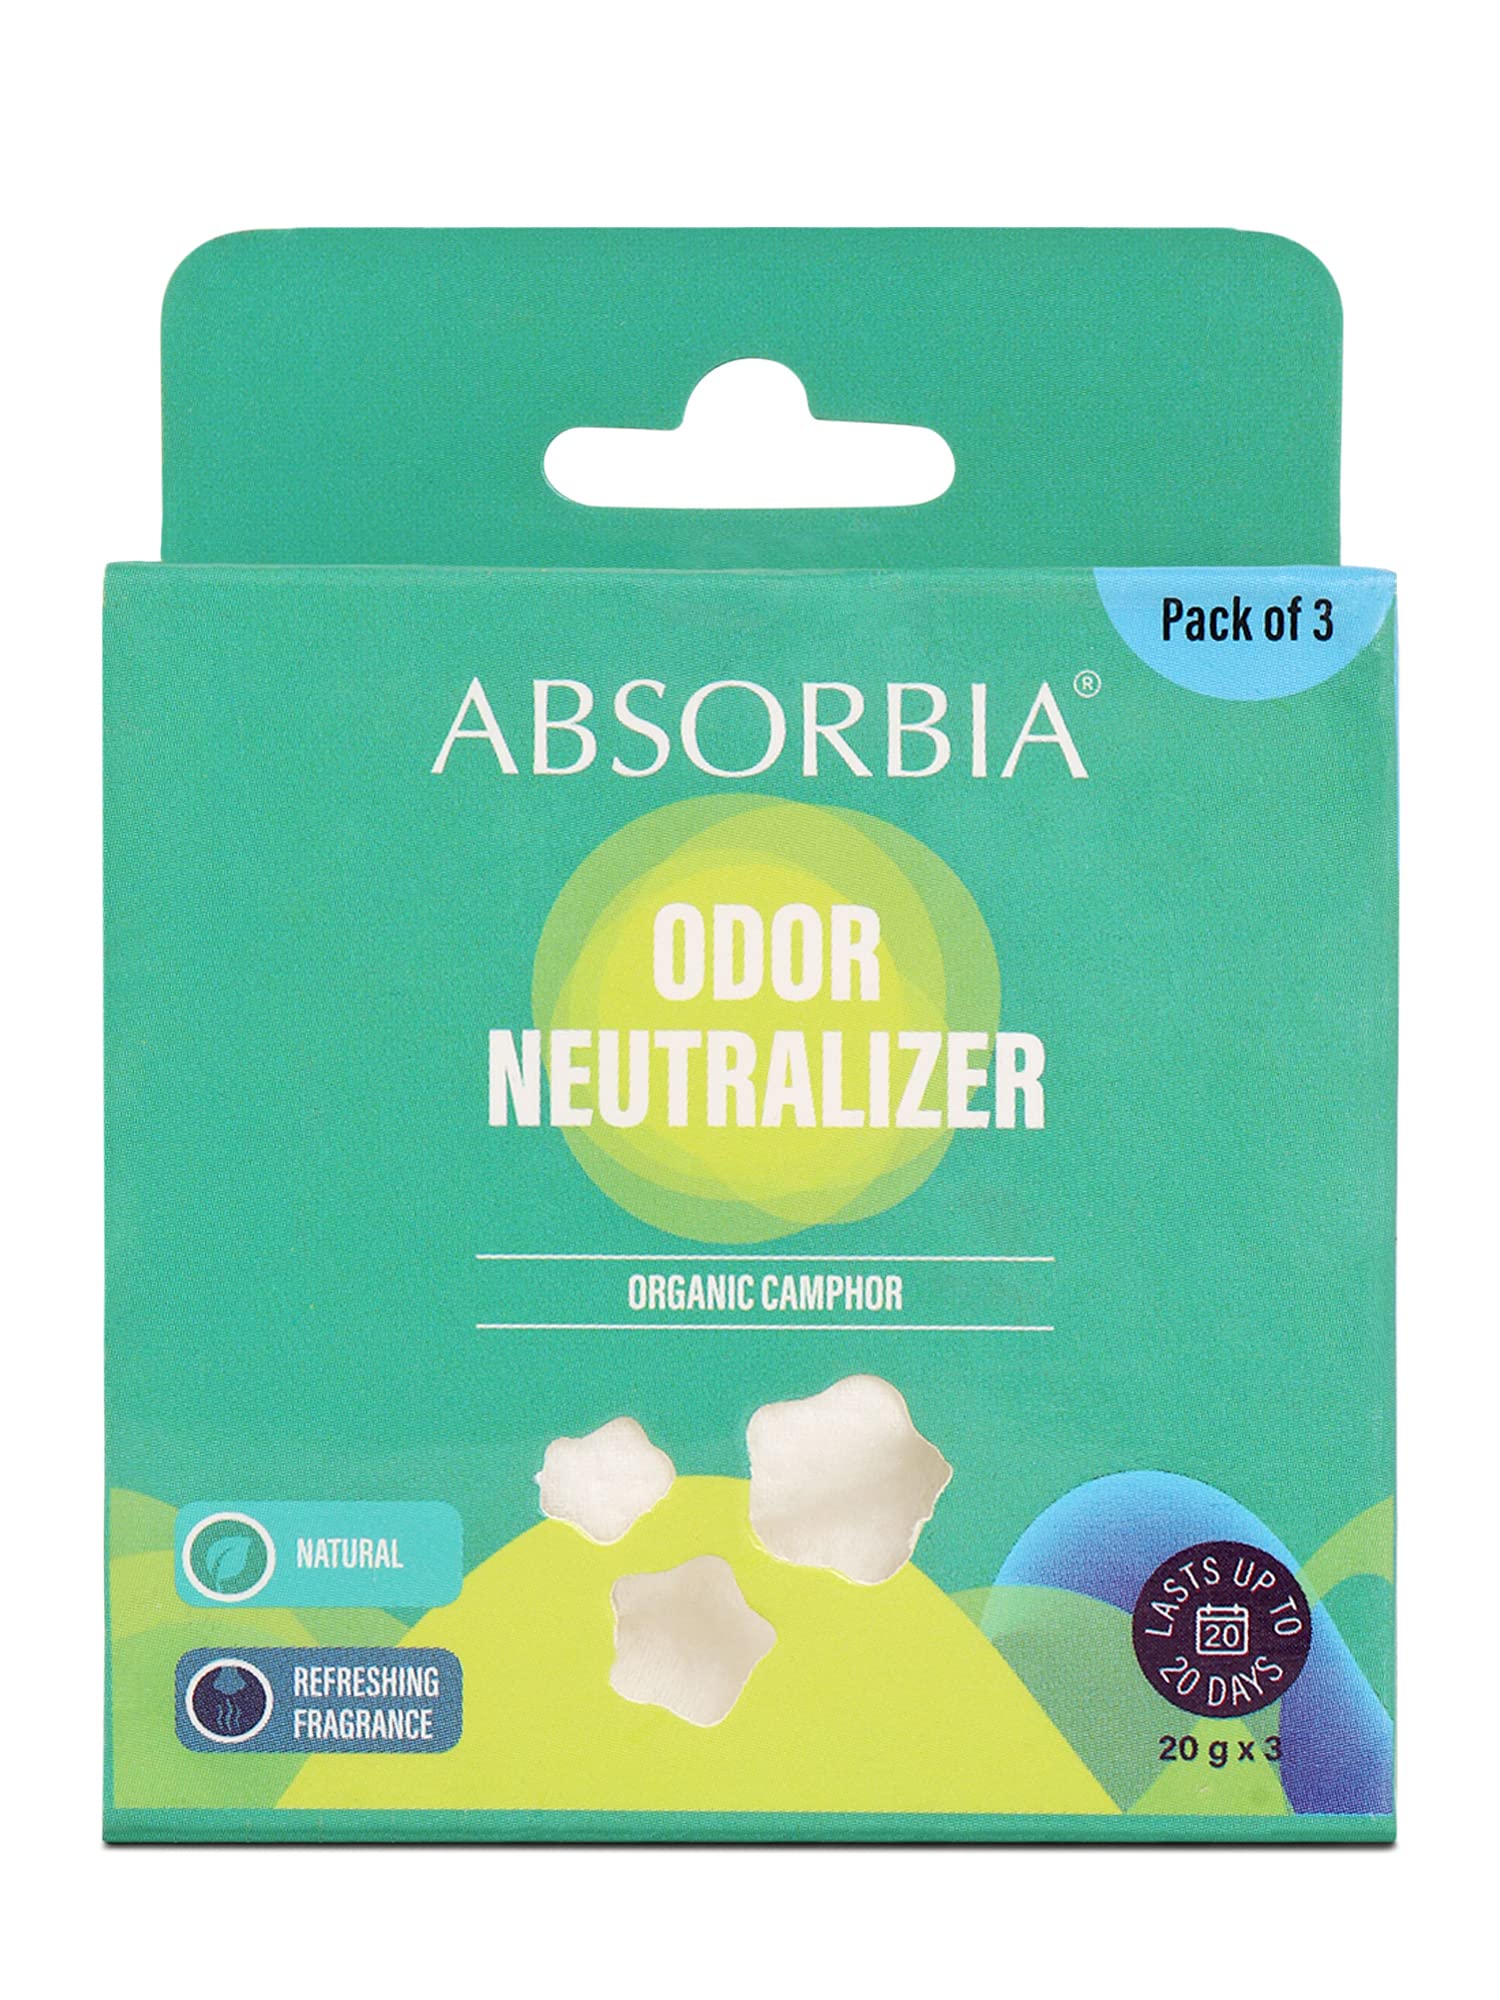 Absorbia Natural Camphor 20G X 3 | Compact | For Room, Car, bathrooms, cupboards and shoe closets | Natural Air Freshener & Bug repellent